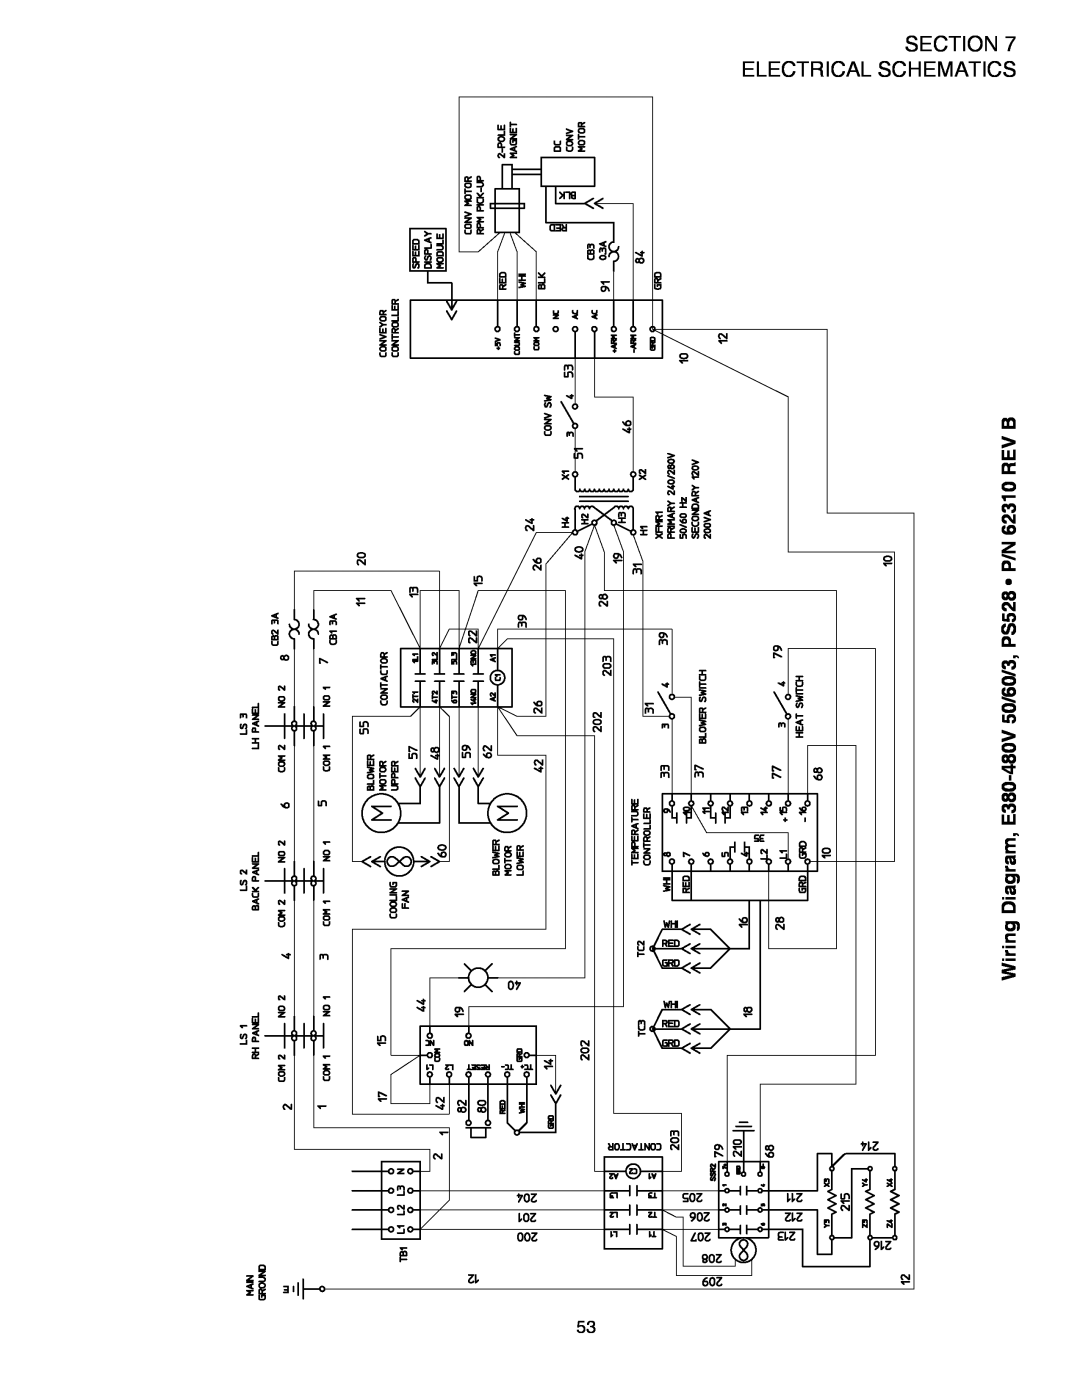 Middleby Marshall PS528E Section Electrical Schematics, Wiring Diagram, E380-480V 50/60/3, PS528 P/N 62310 REV B 